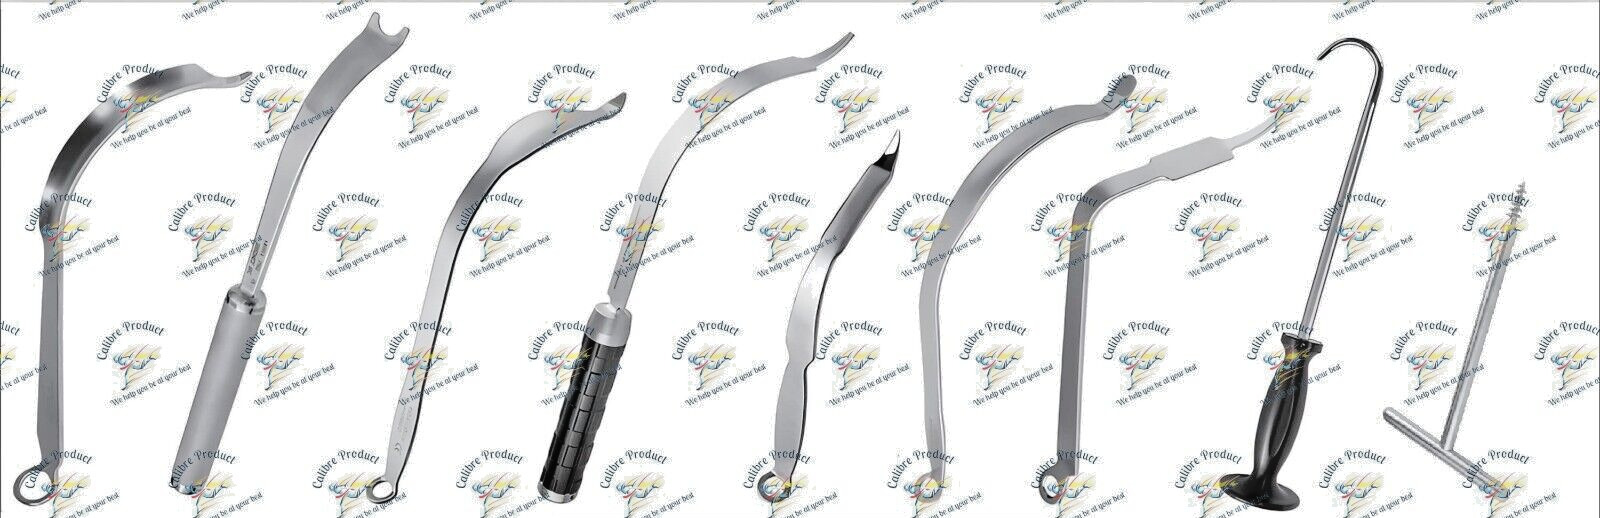 Direct Anterior Approach Instrument Hip Arthoplasty Surgery  Set Of 10